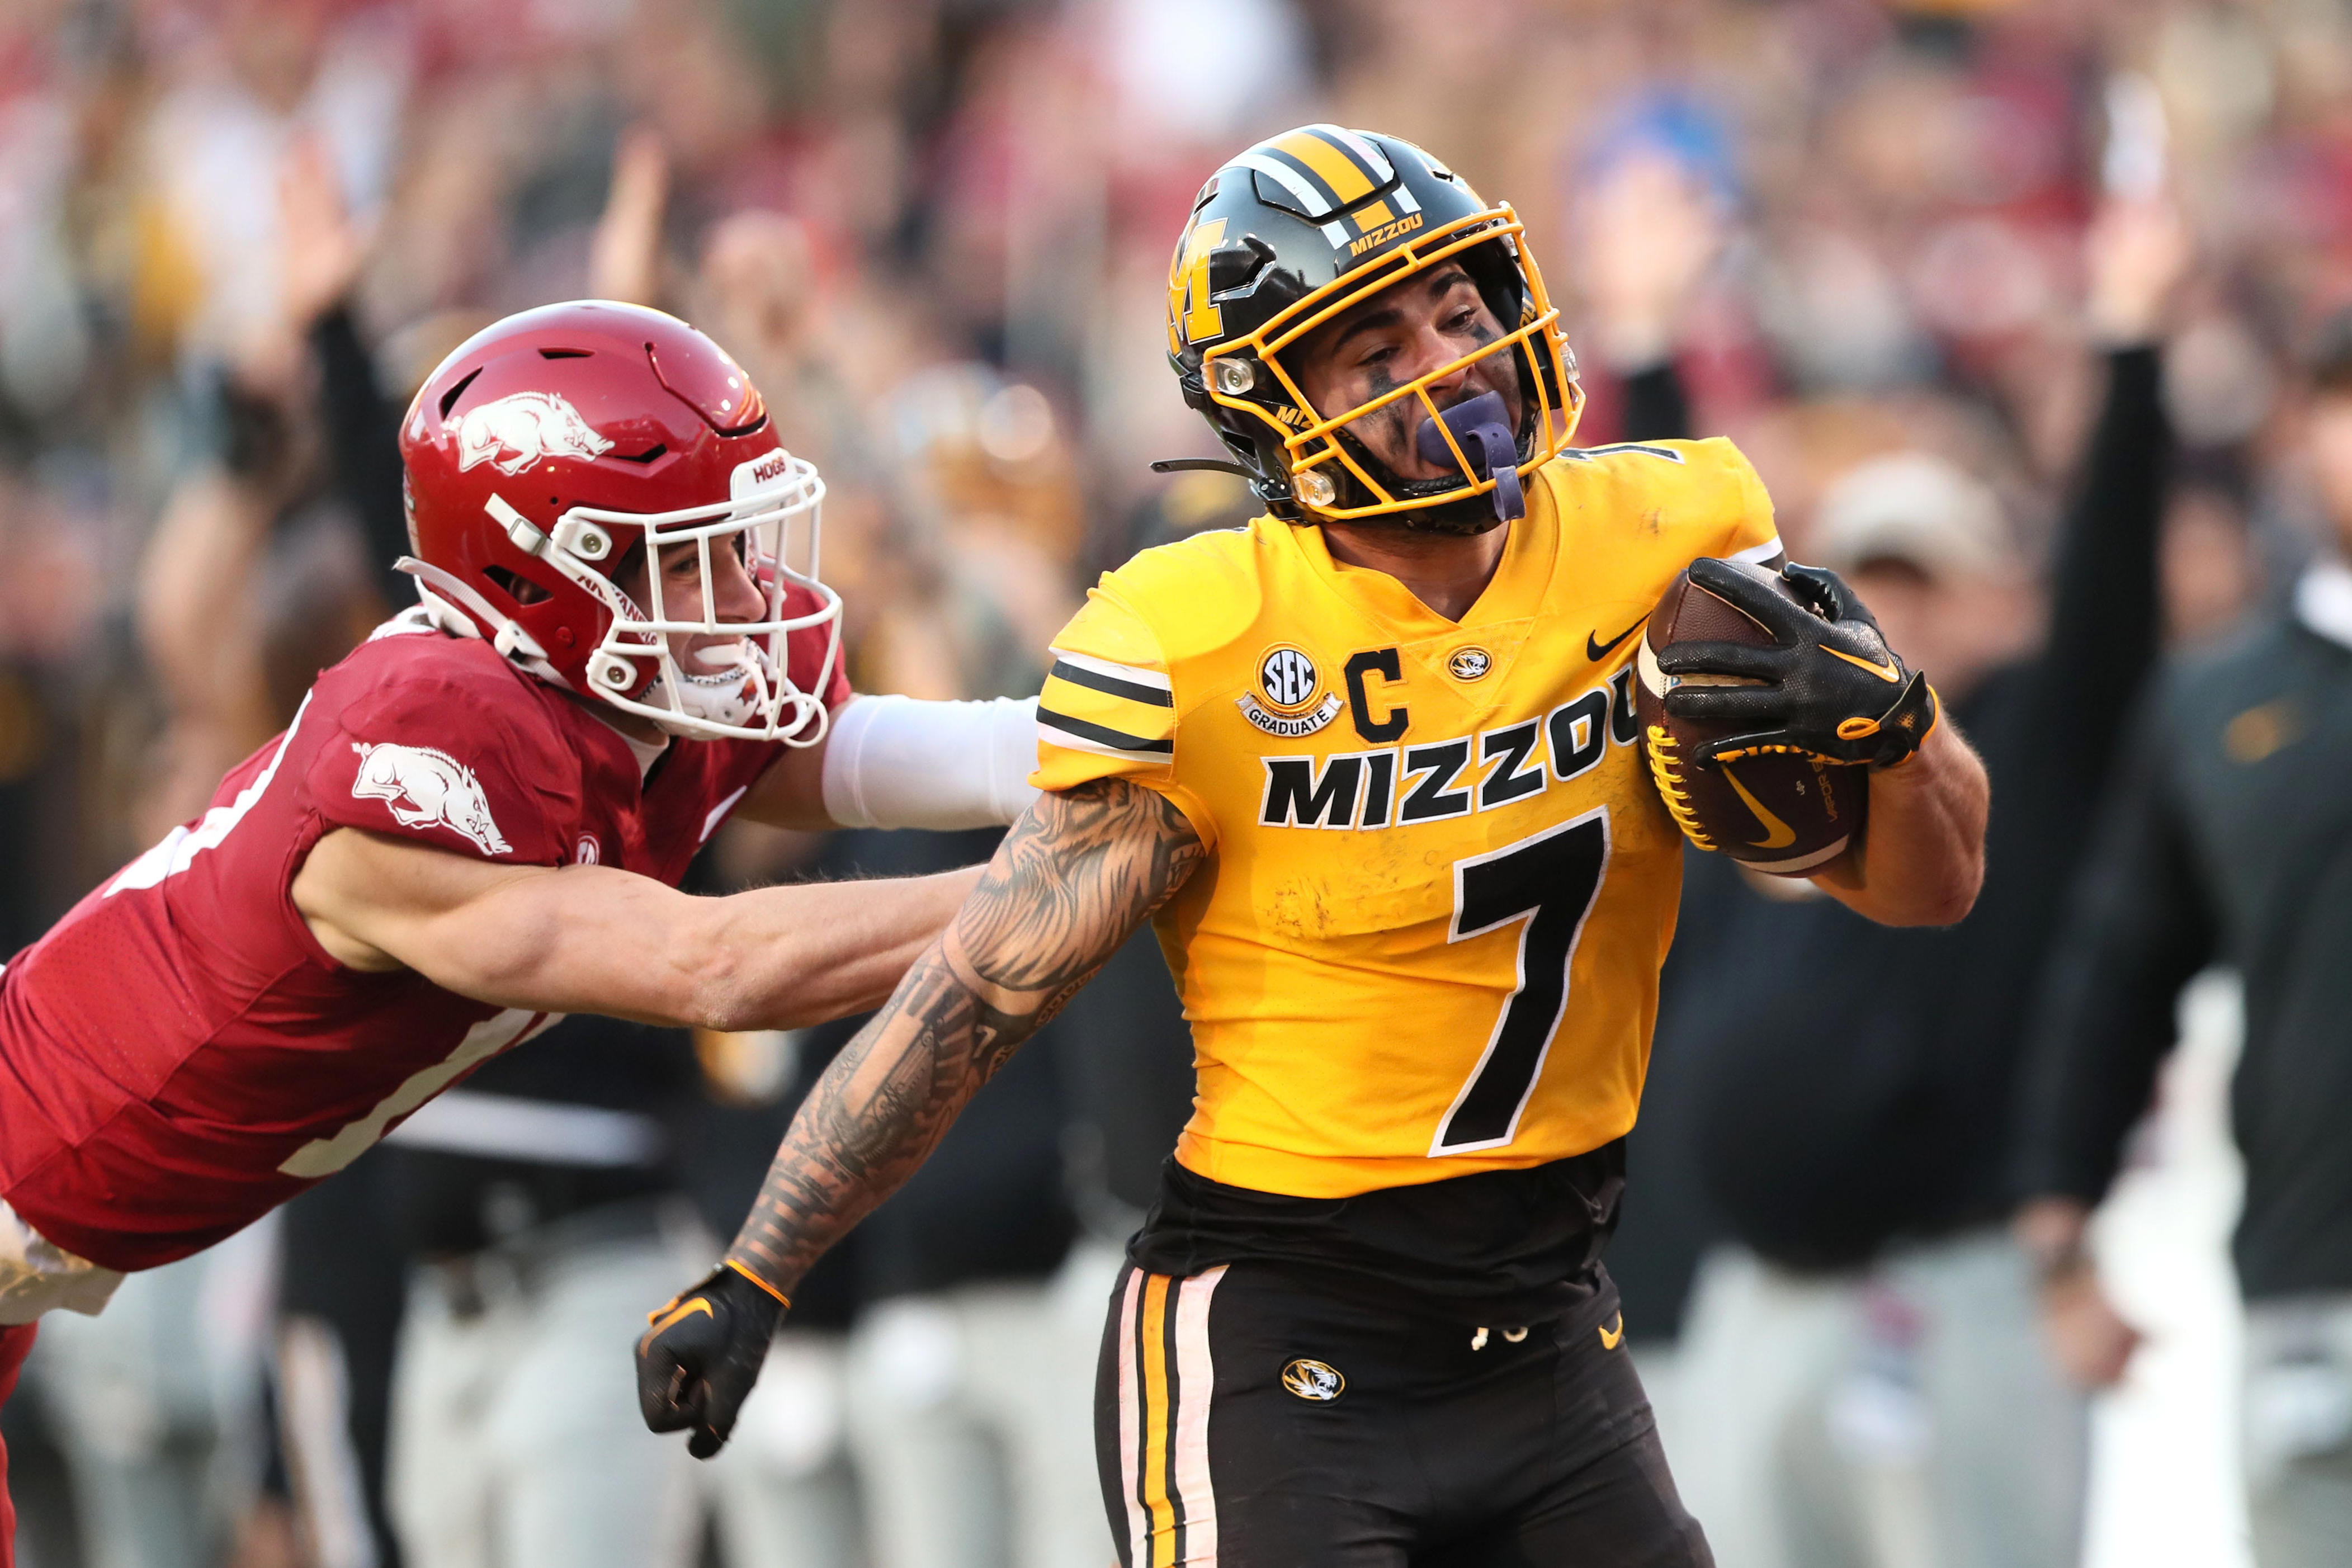 nfl draft's best undrafted free agents: who are top 10 players available?